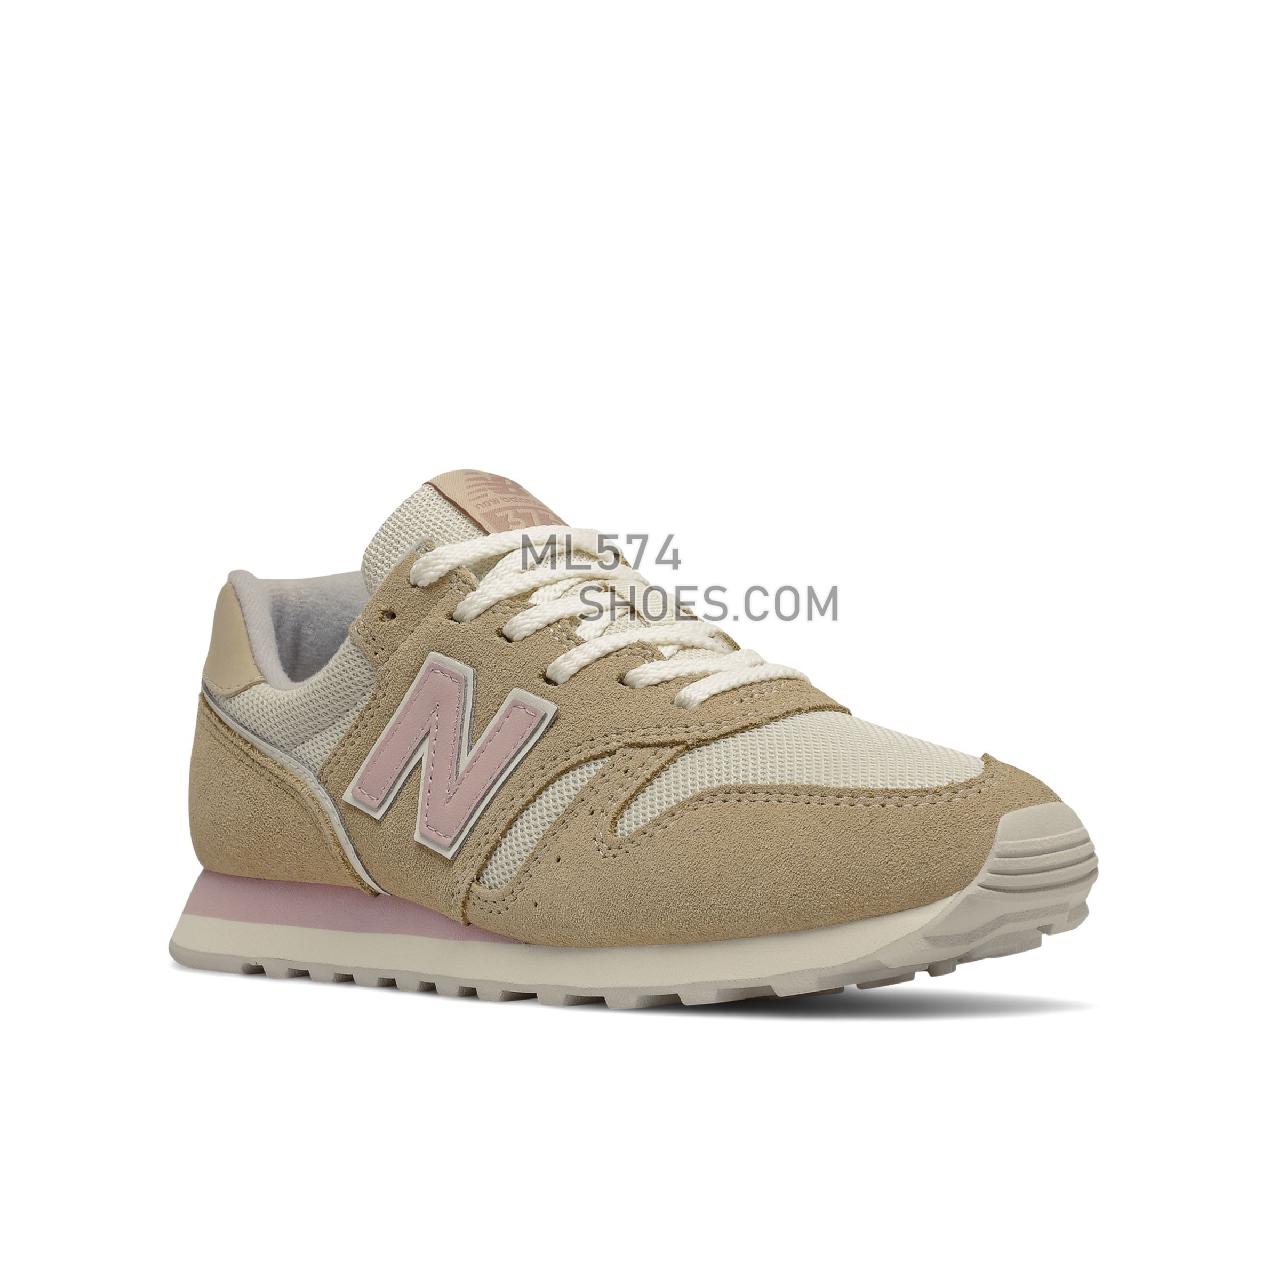 New Balance 373V2 - Women's Classic Sneakers - Incense with Space Pink - WL373EE2